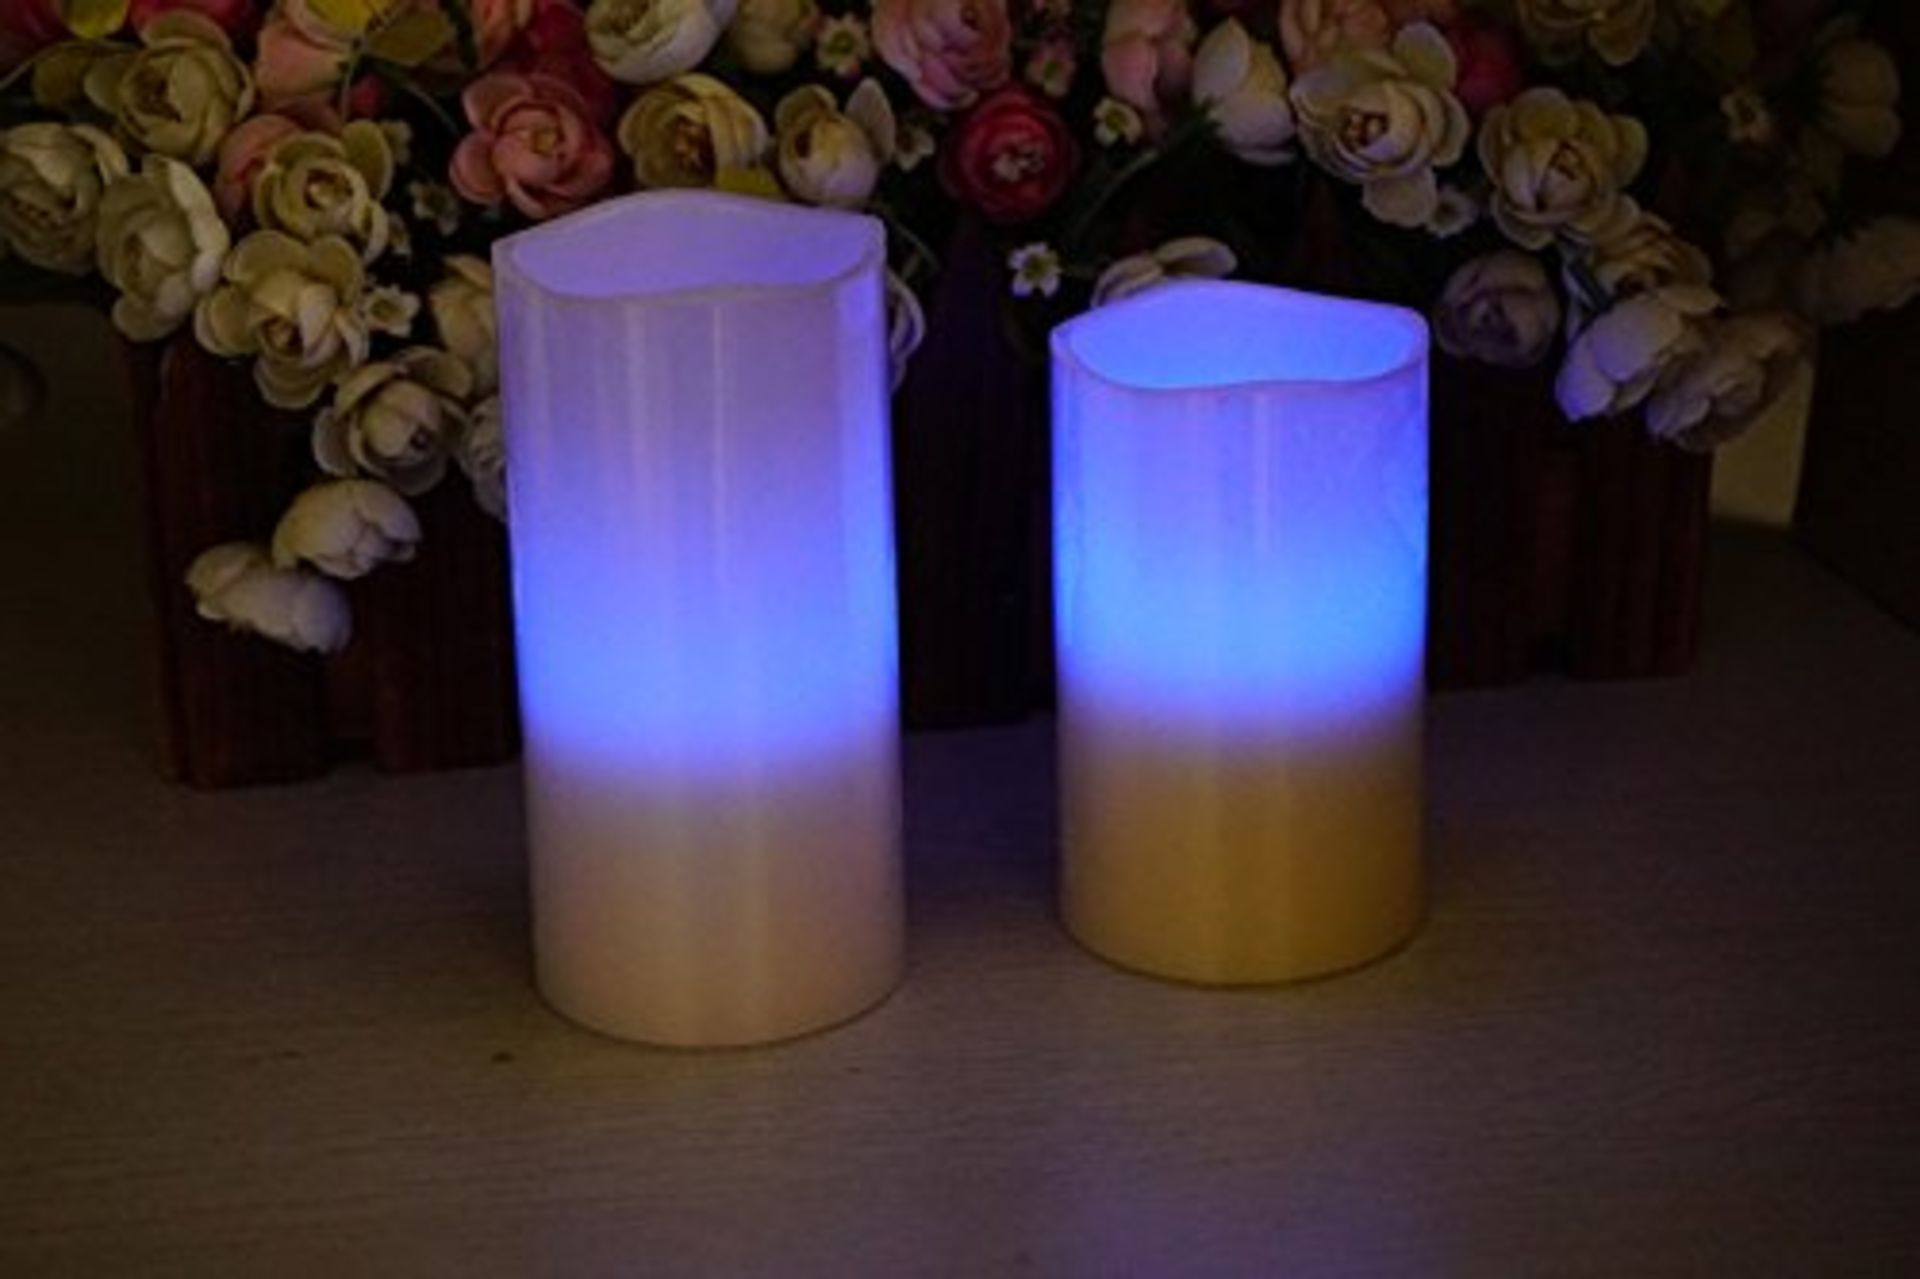 V Brand New 2 Pack of LED Rechargeable Jasmine Scented Candles with Colour changing Remote Control - Image 2 of 2